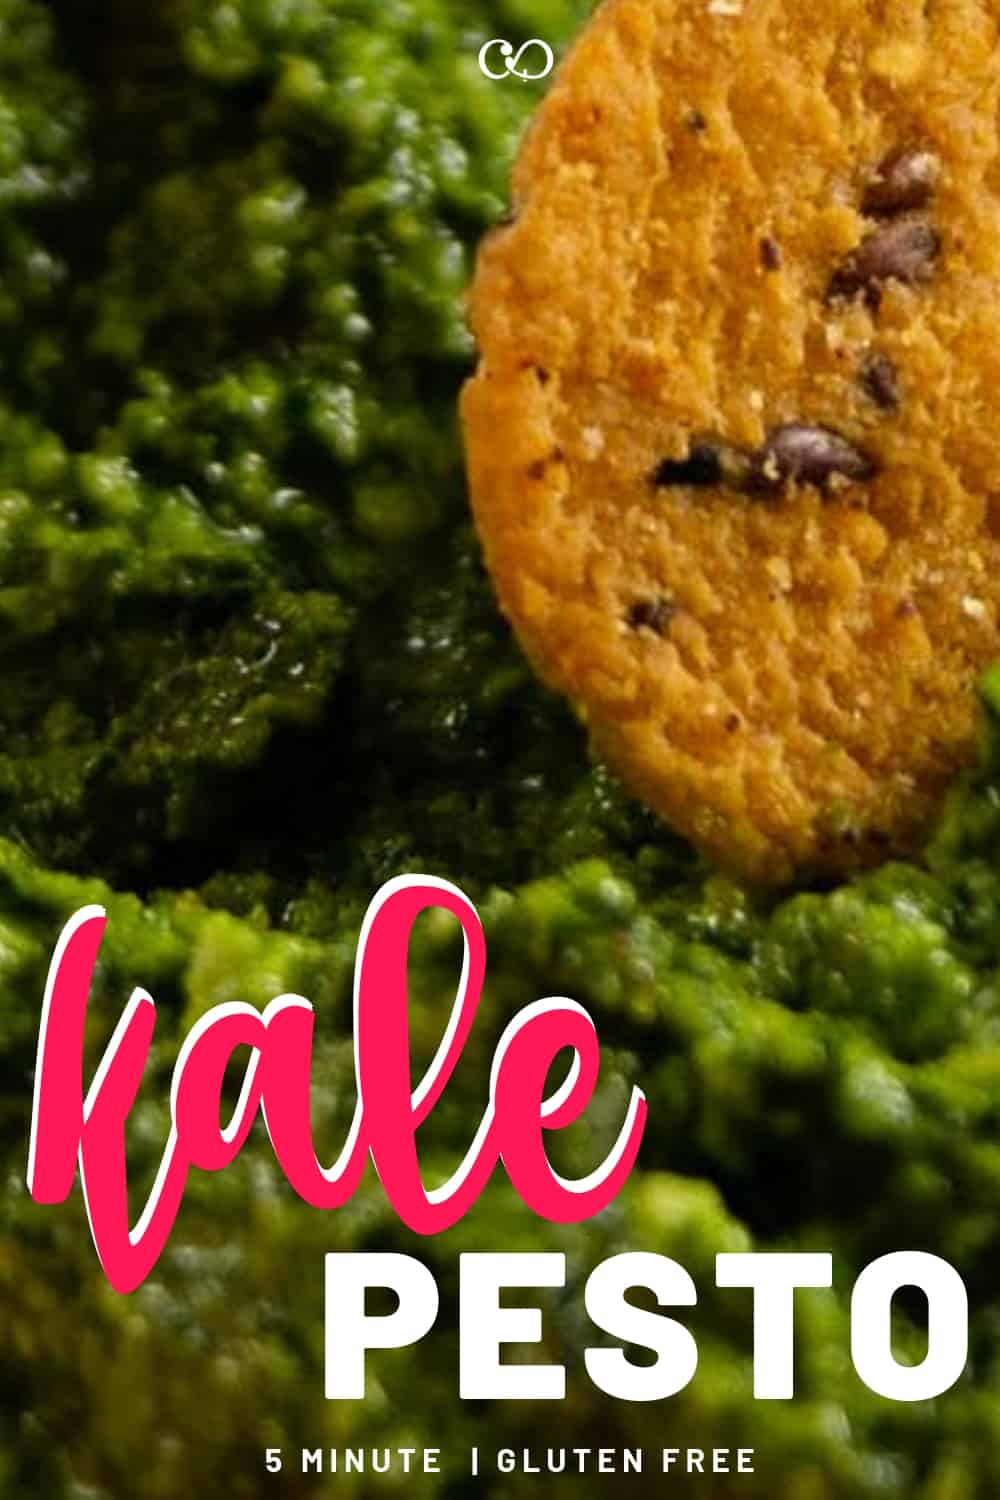 Kale Pesto is a simple 5 minute recipe. Perfect as a sandwich spread, or as a base for a simple but delicious pasta sauce. #vegan #pasta #walnut #salad #healthy #kale #easy #5minutes ♡ cheerfulcook.com via @cheerfulcook